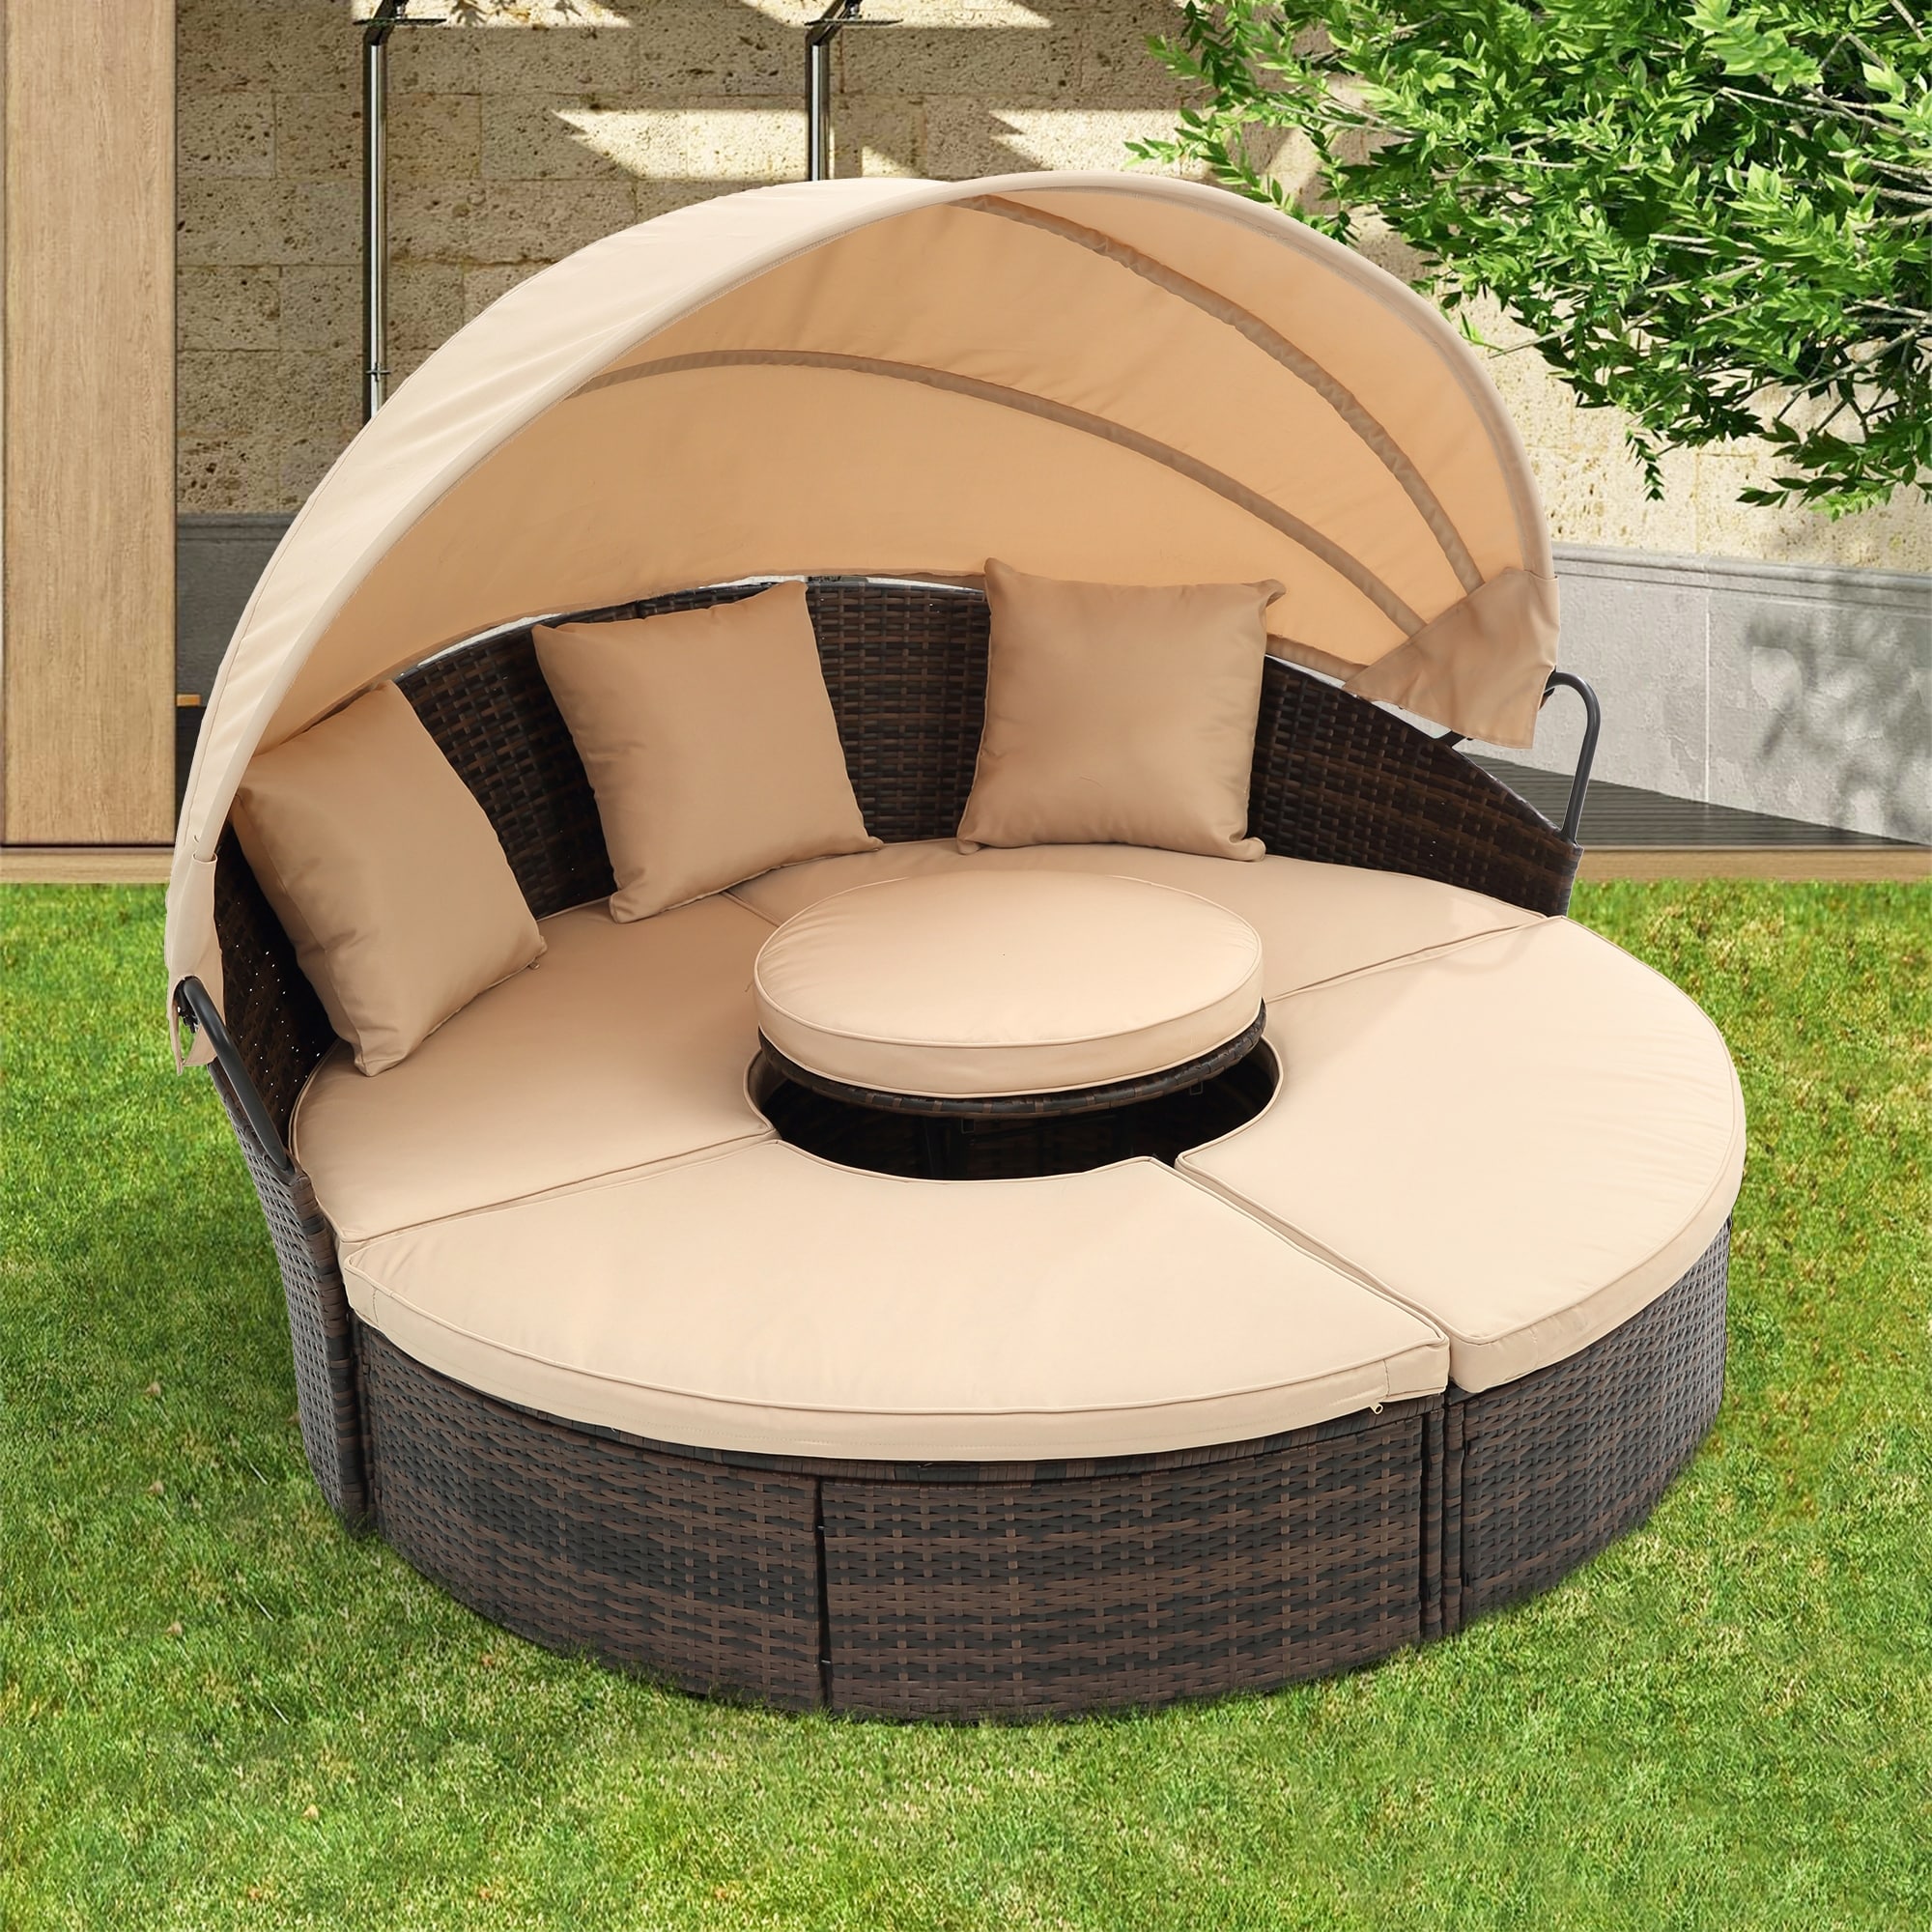 Beige Outdoor Rattan Round Lounge Sofa Bed With Canopy And Lift Coffee Table  With Removable Cushions And Pillows